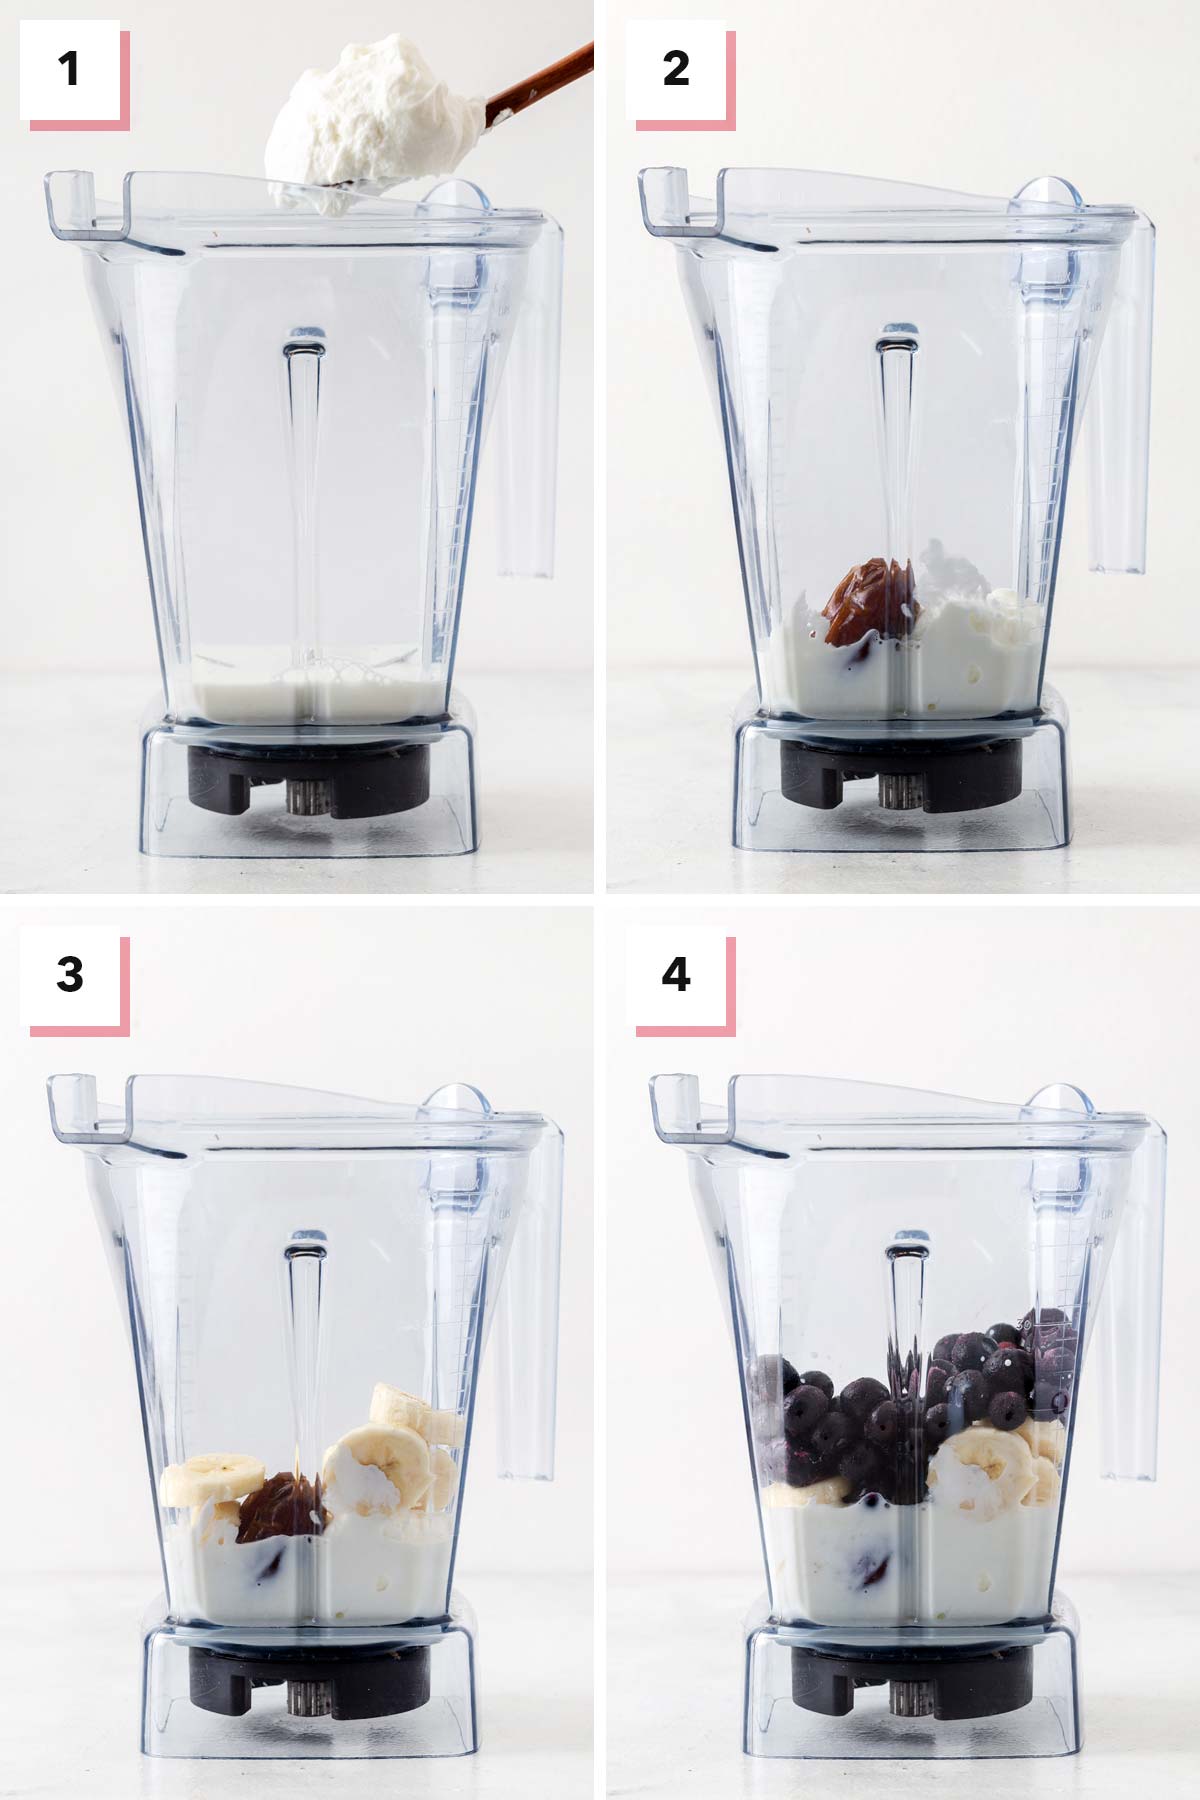 Steps to make a Blueberry smoothie in a blender.